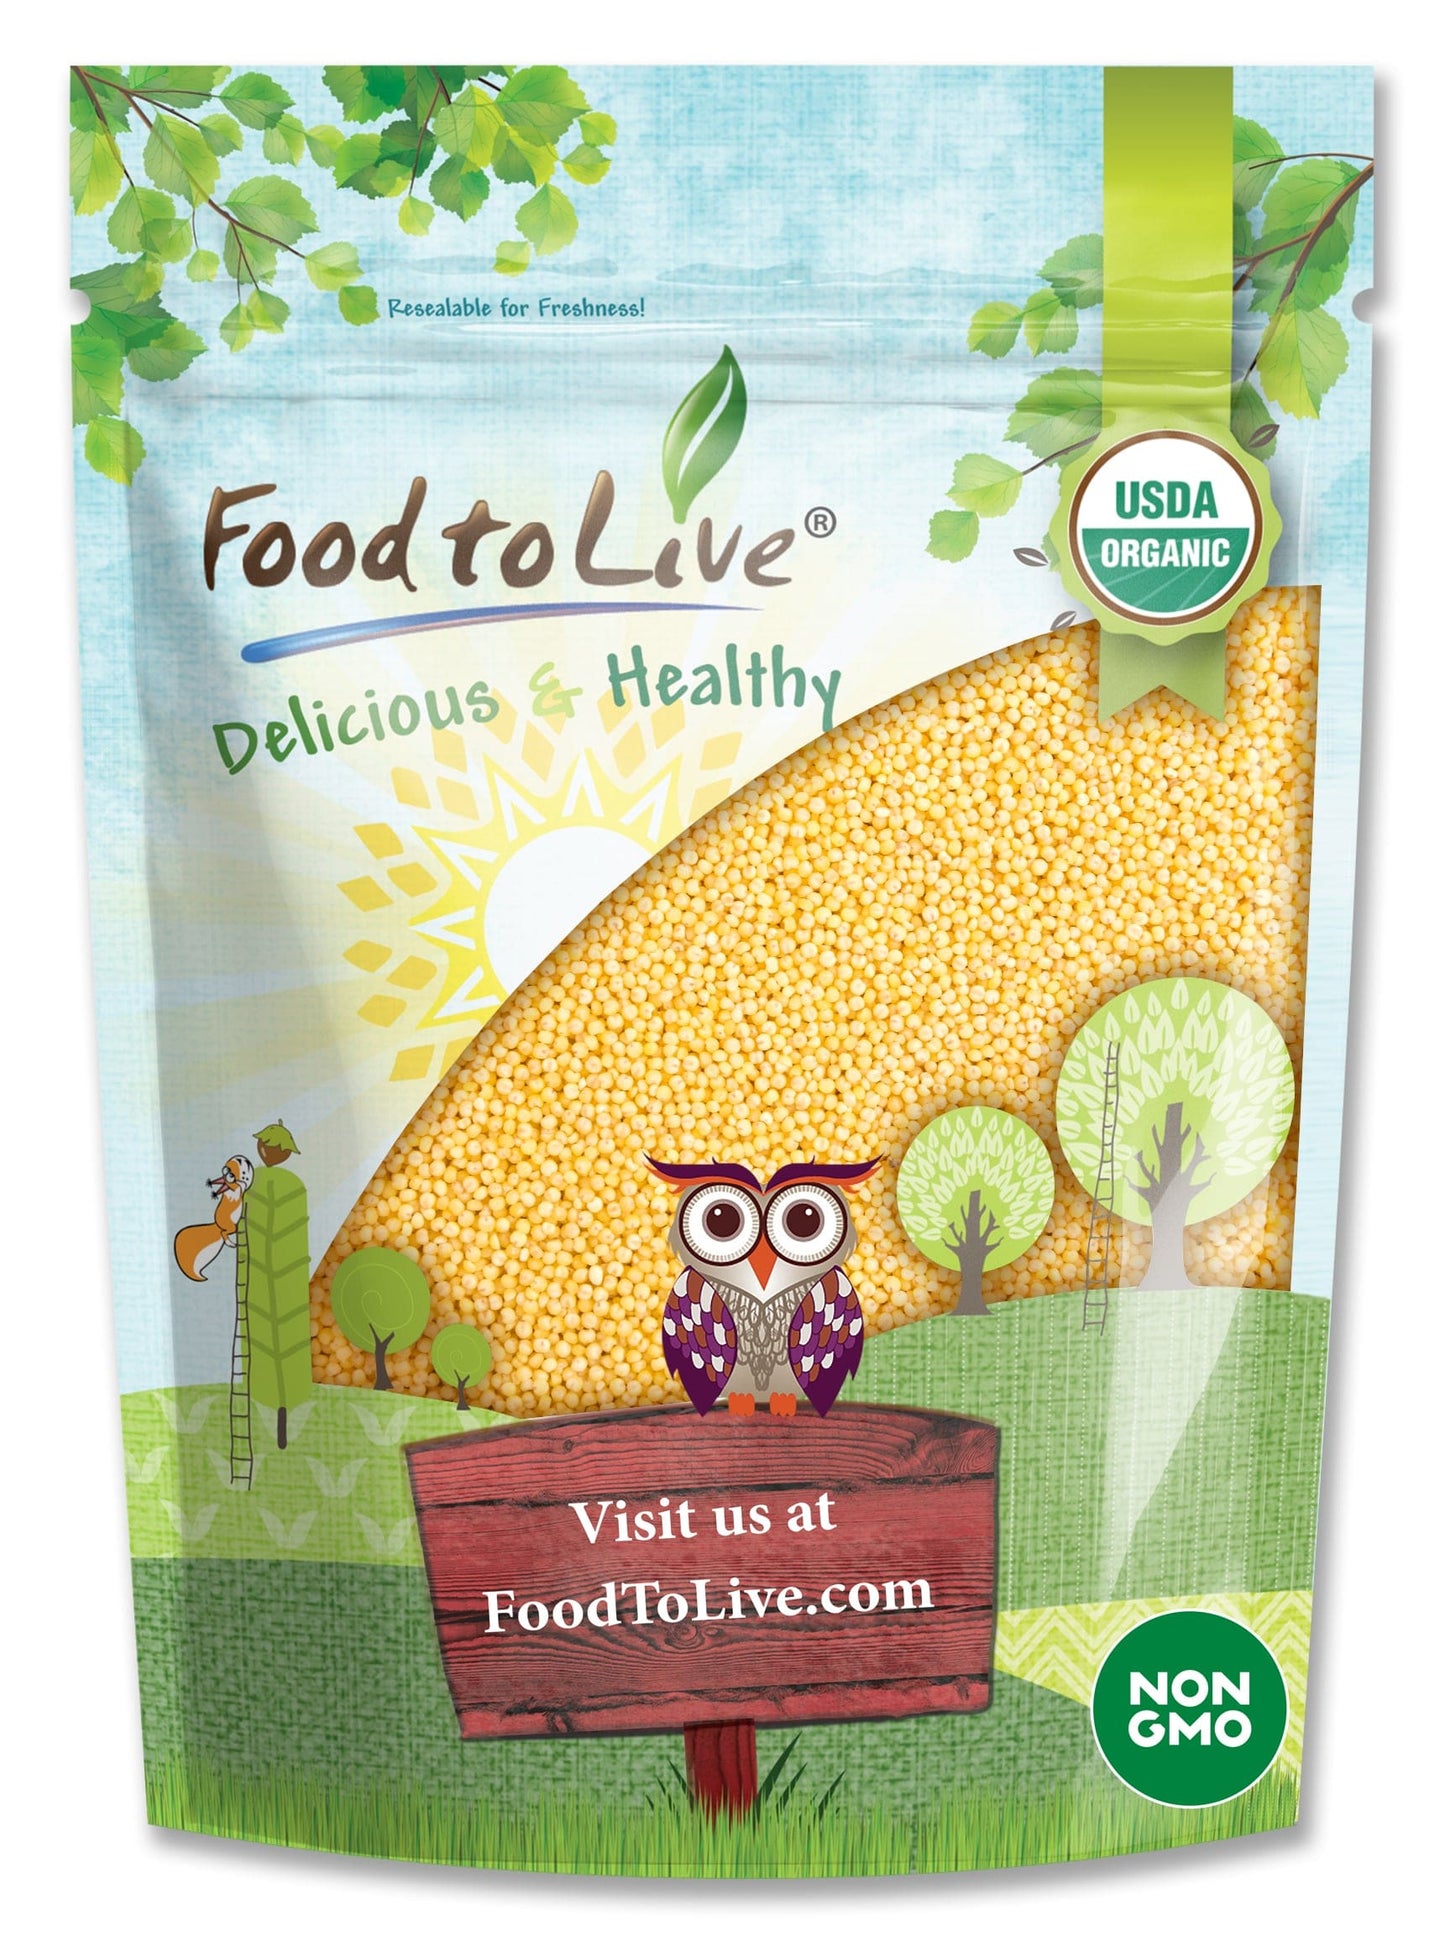 Organic Hulled Millet — Whole Grain Seeds, Non-GMO, Kosher, Raw, Bulk, Product of the USA - by Food to Live